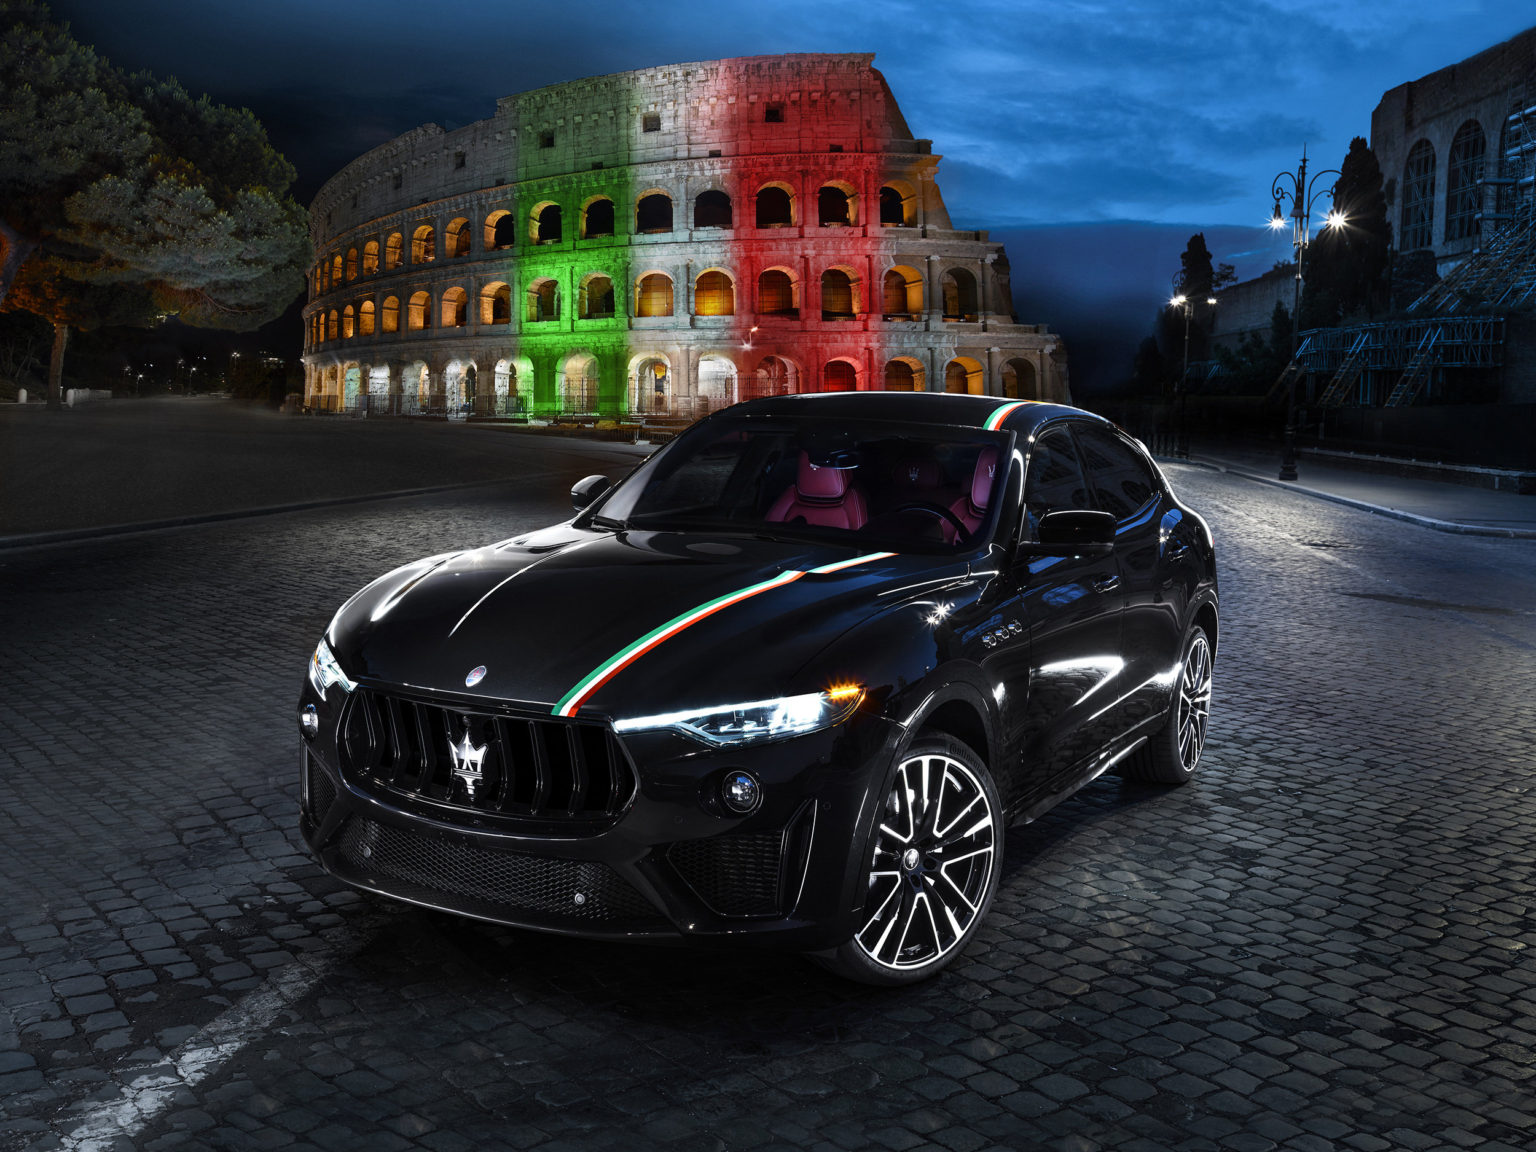 The new livery celebrates the history of the Italian automobile industry as Maserati looks to its future.